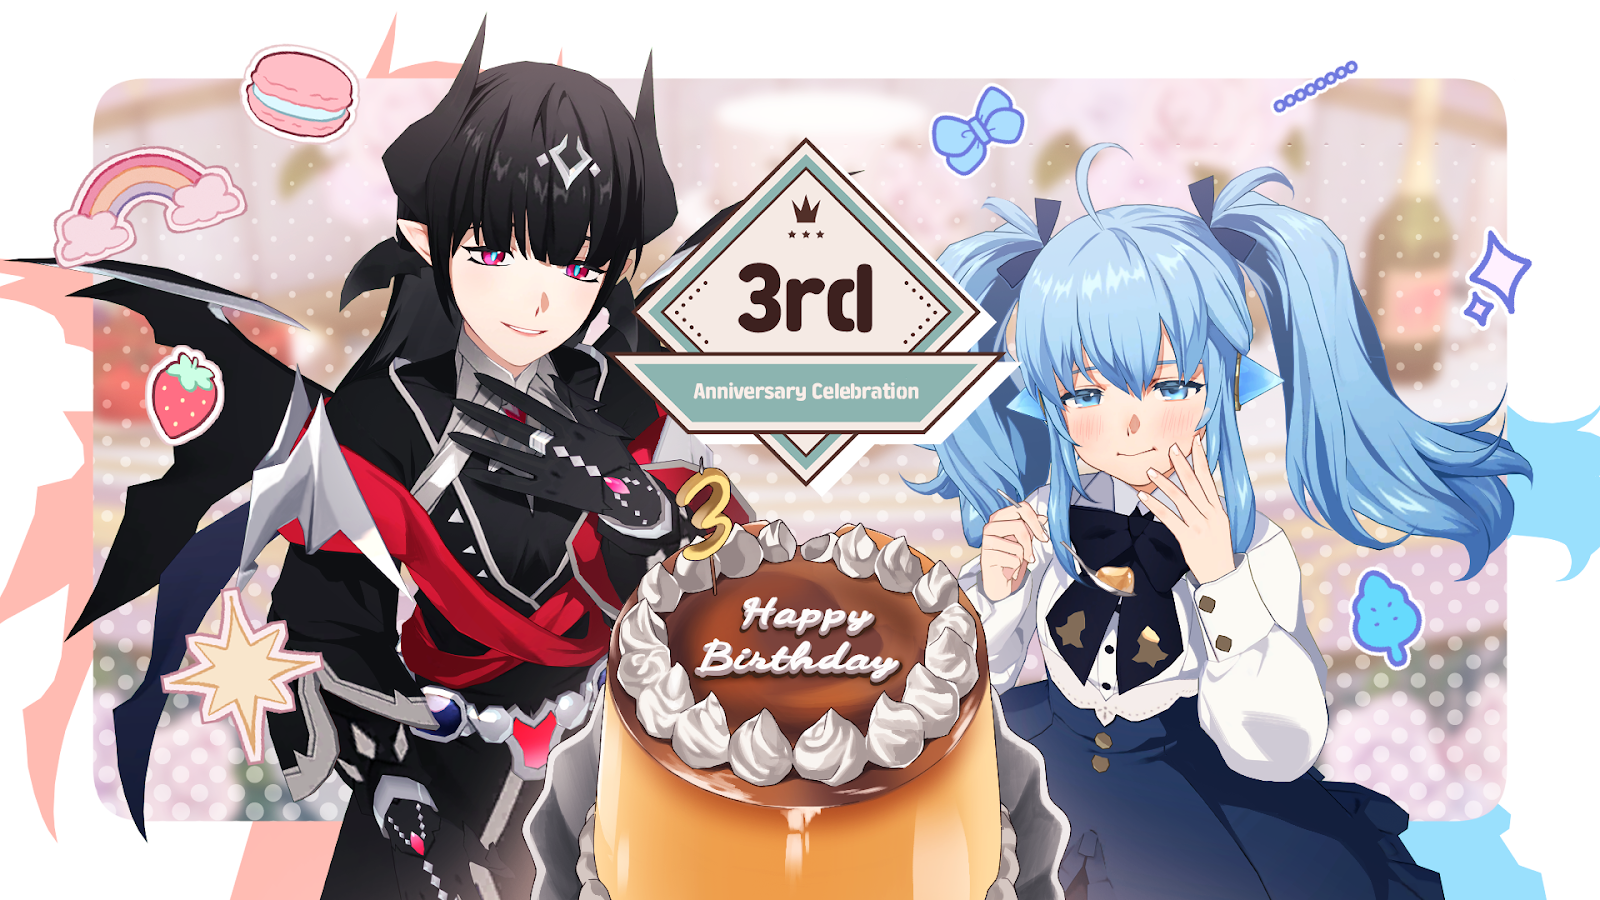 [Coupon] Global Release Phase 2 - 3rd Anniversary Artwork & Coupon